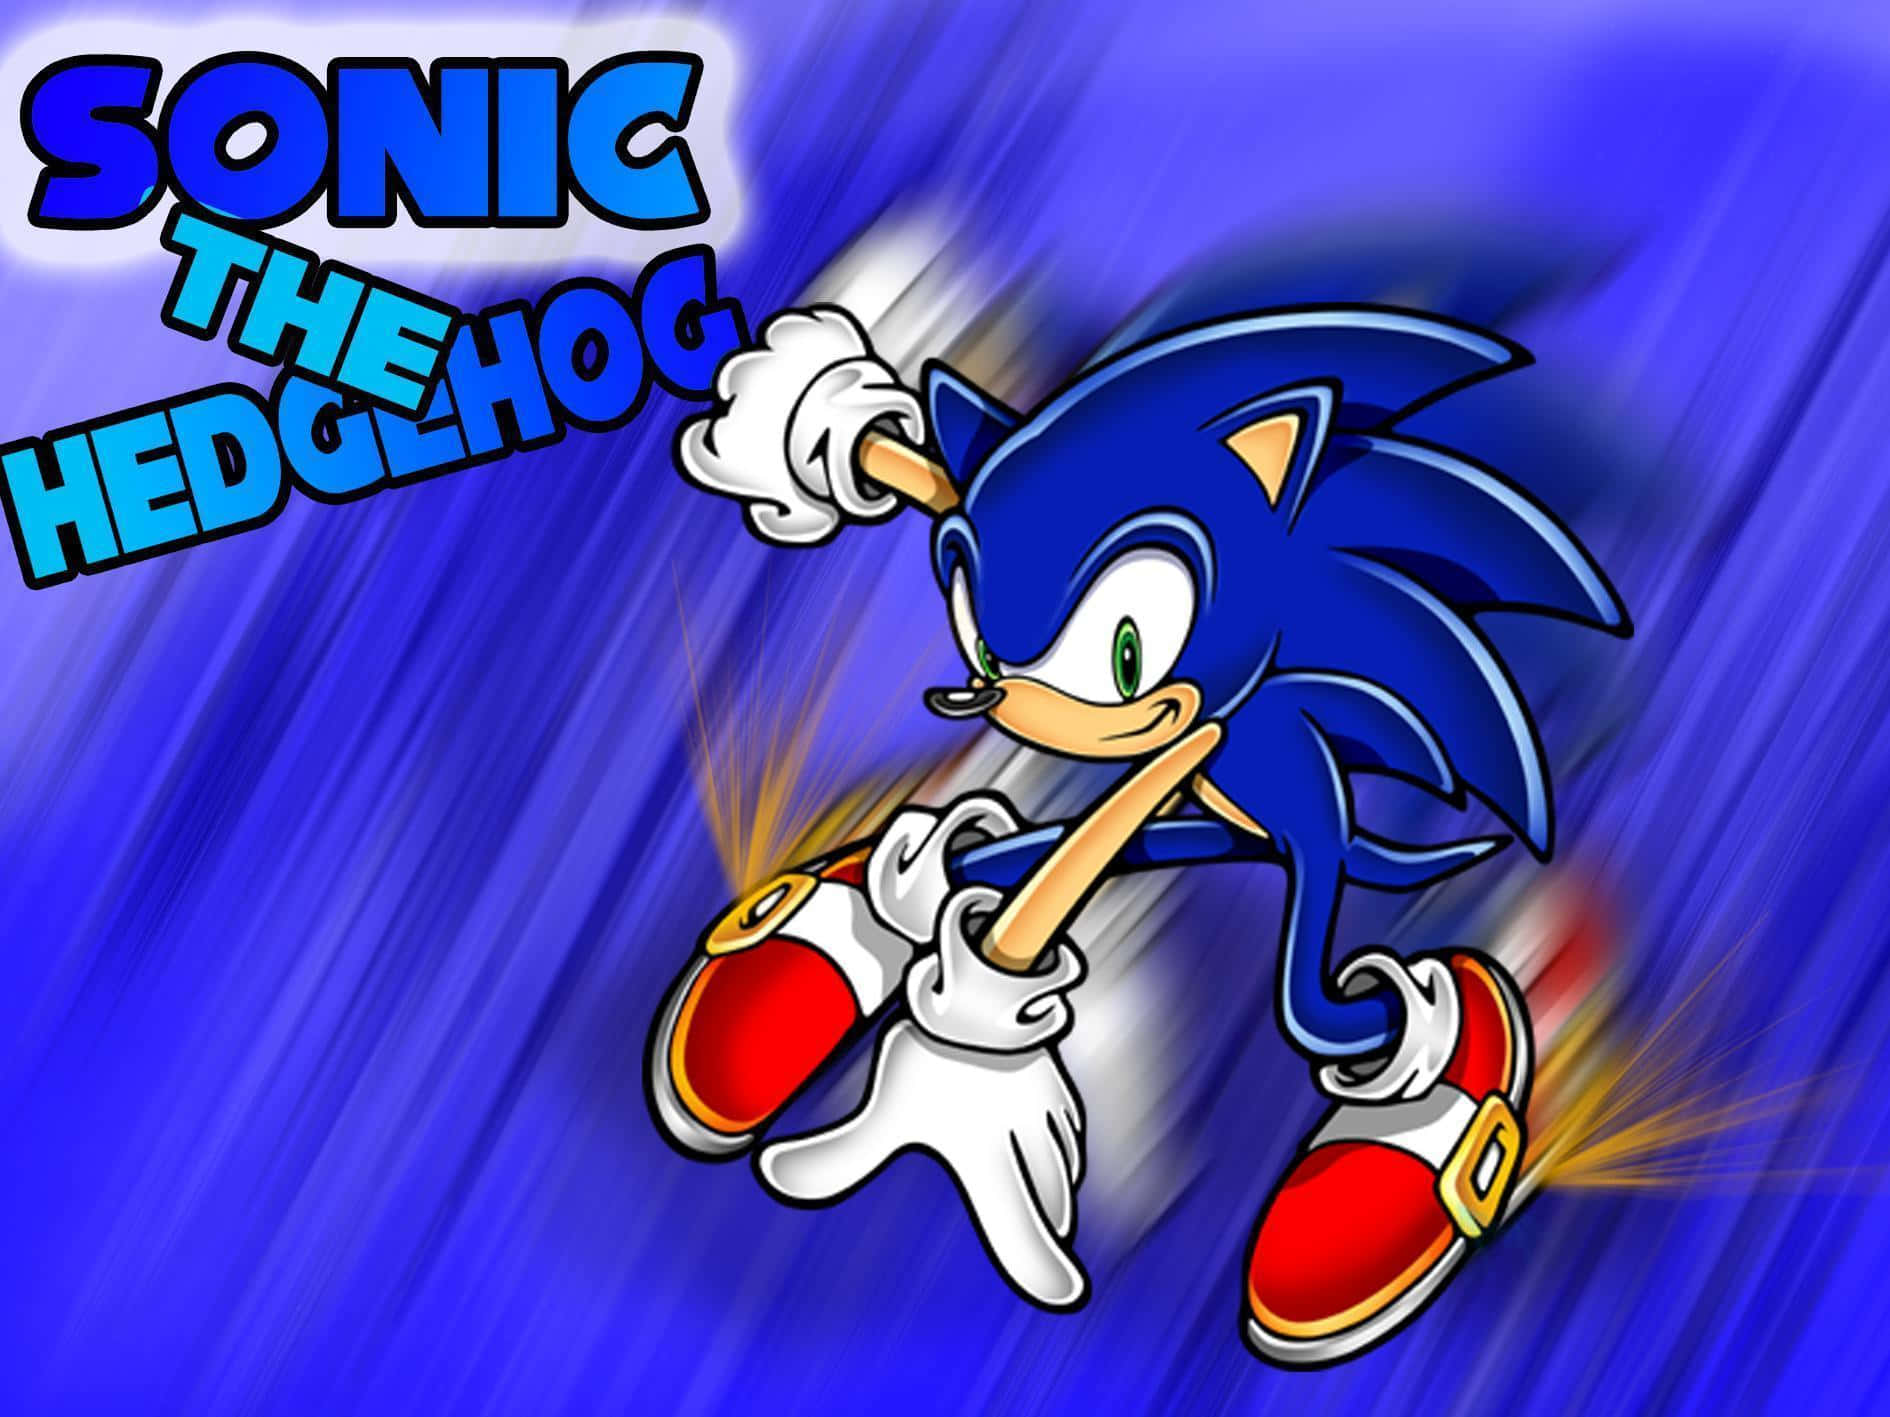 Classic Sonic poses in classic style!